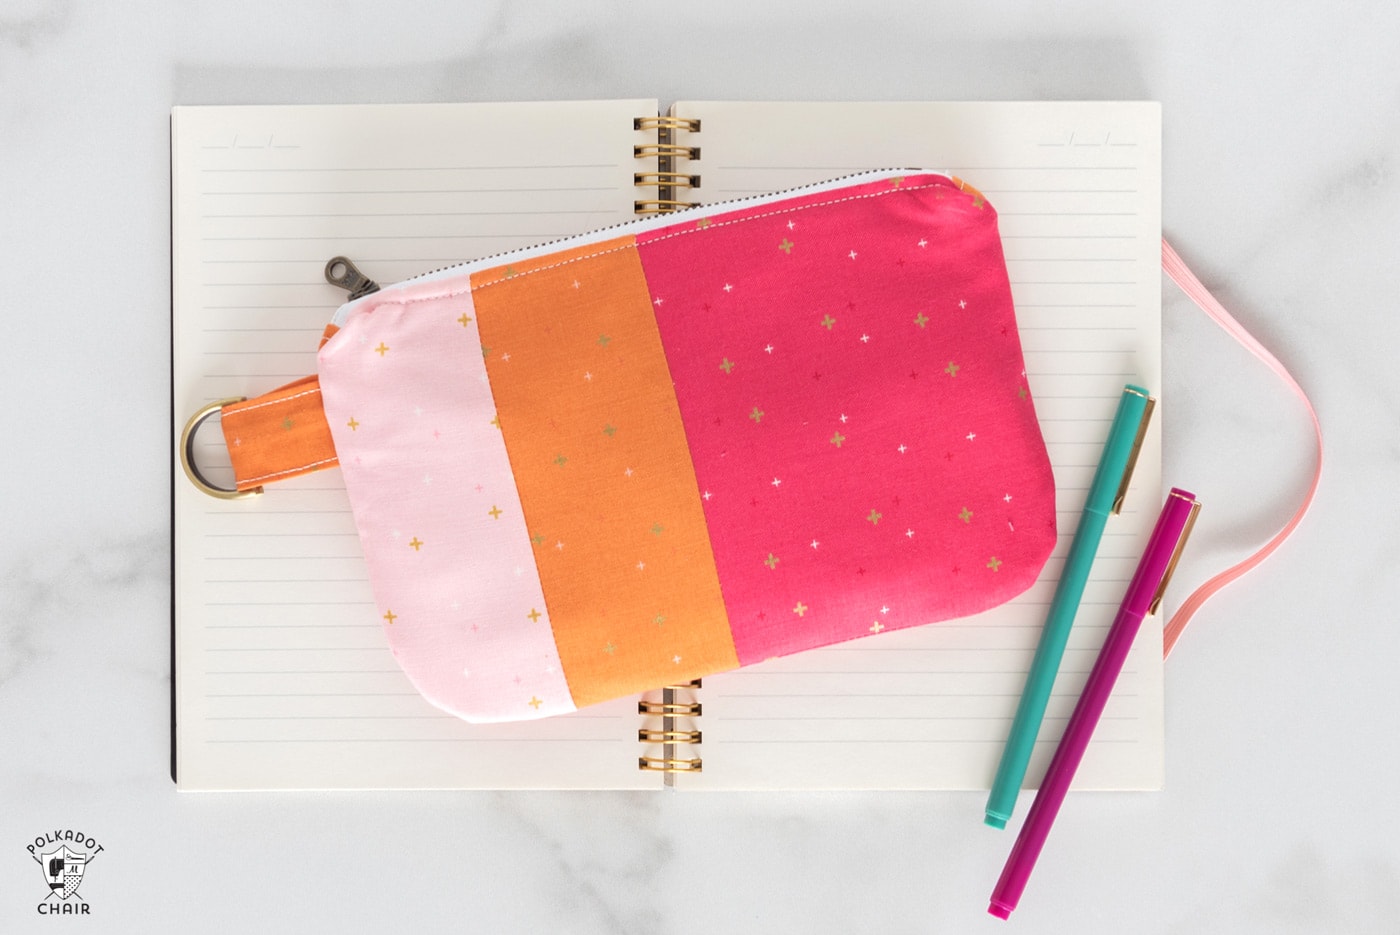 Pink and orange zip clutch on notebook with pens